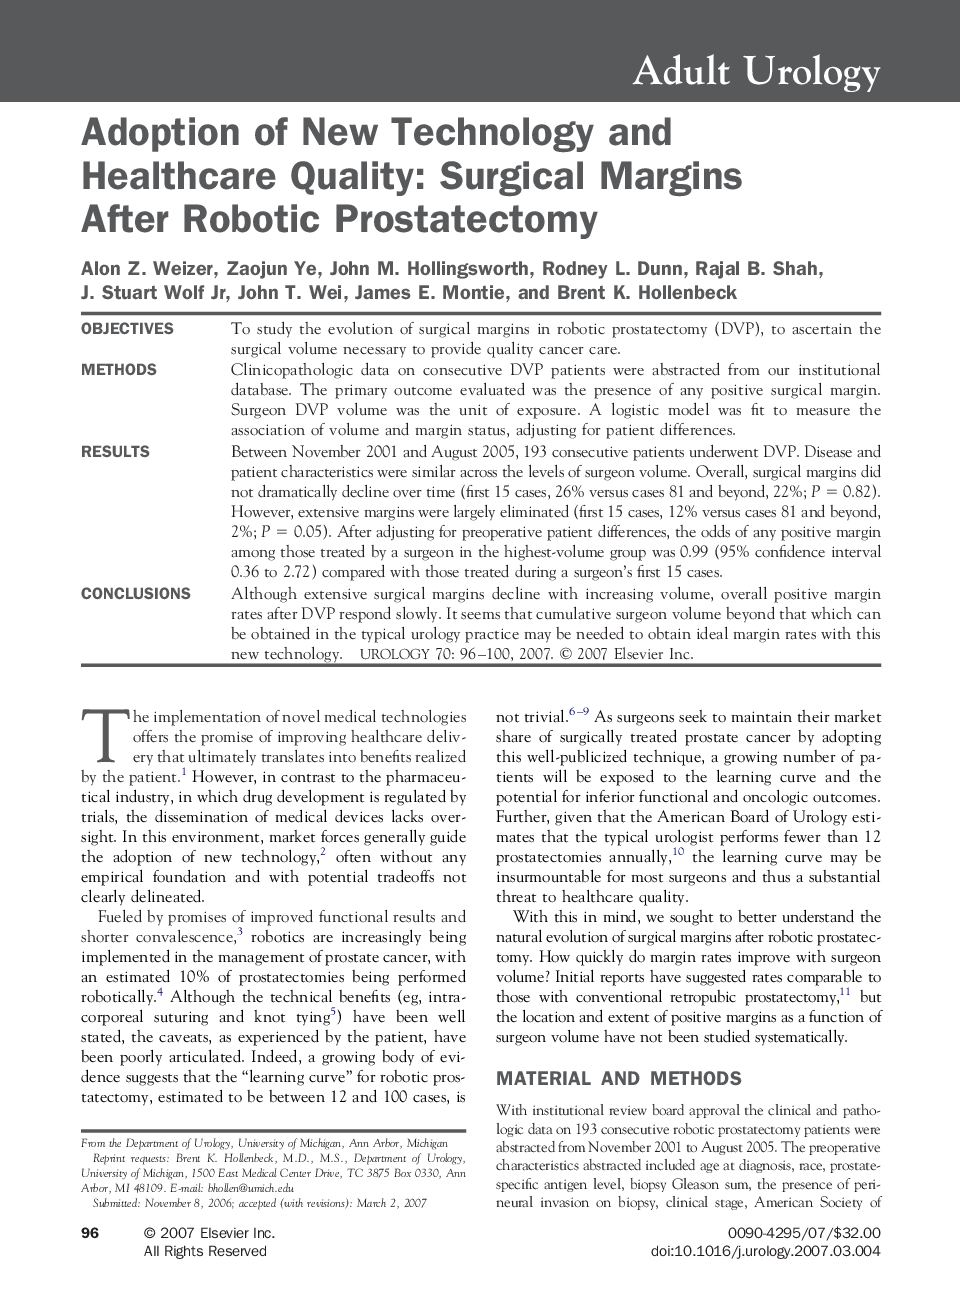 Adoption of New Technology and Healthcare Quality: Surgical Margins After Robotic Prostatectomy